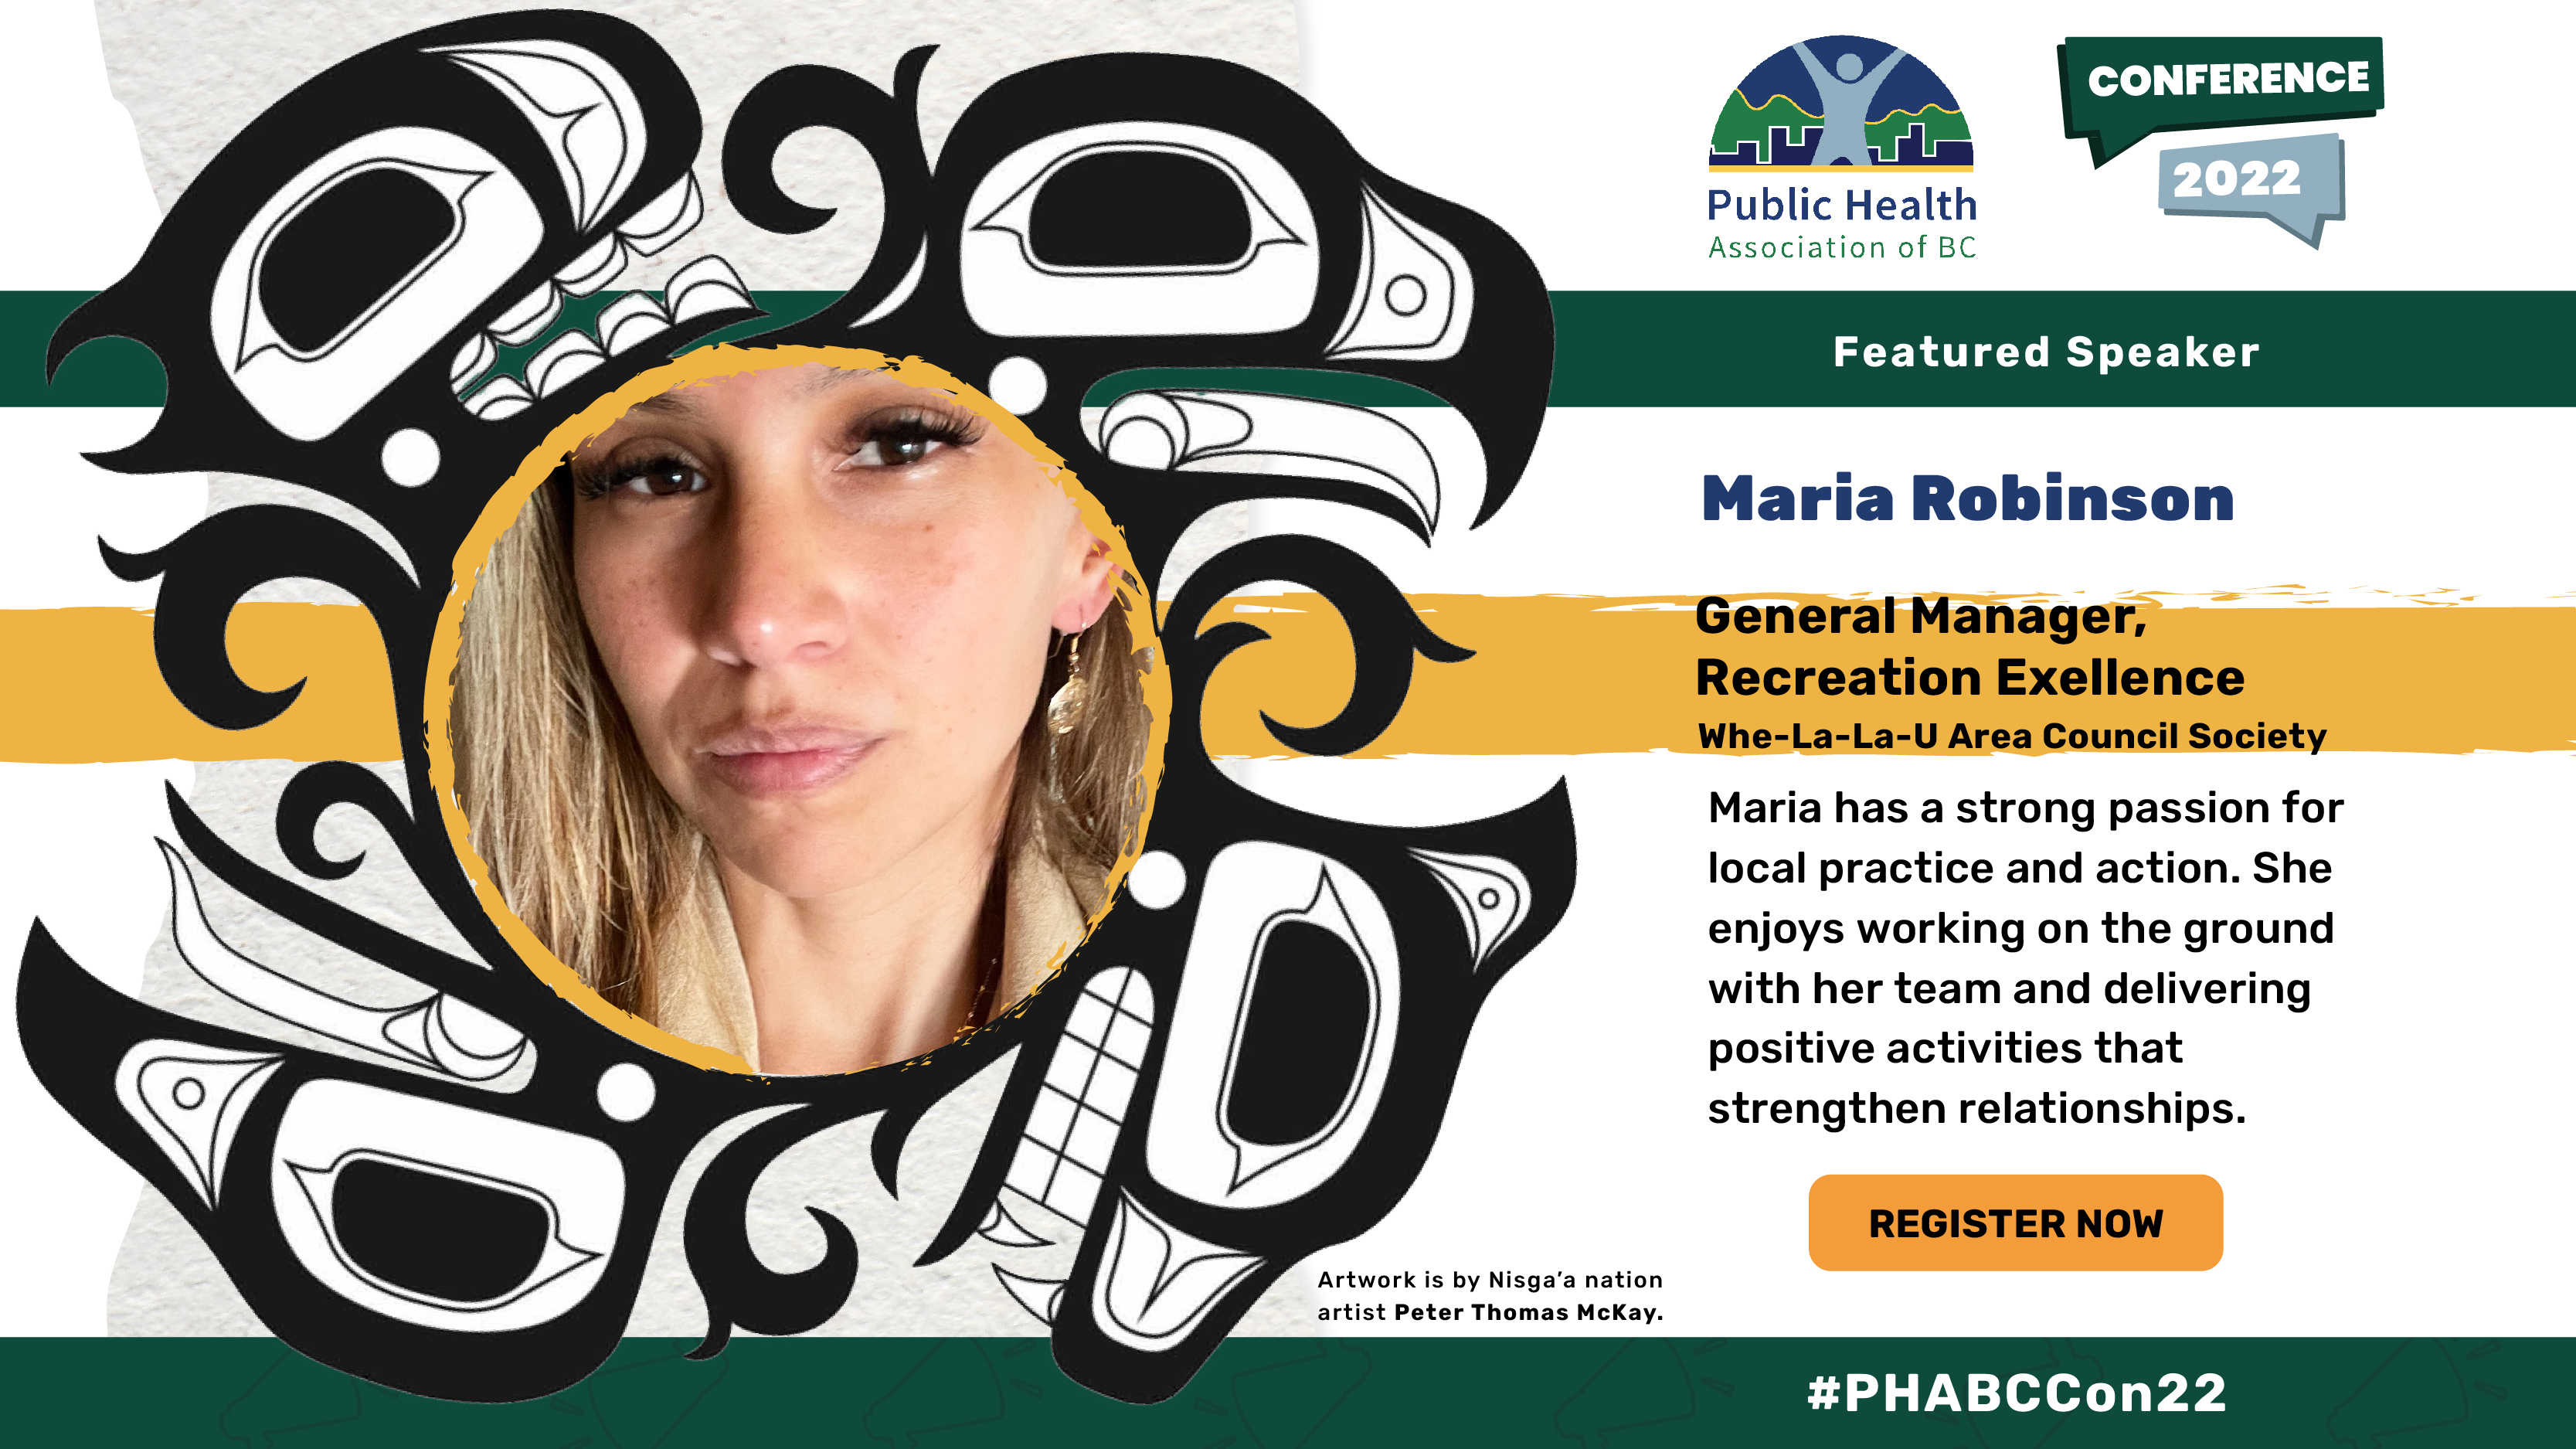 Maria Robinson. General Manager, Recreation Excellence. Whe-La-La-U Area Council Society Maria has a strong passion for local practice and action. She enjoys working on the ground with her team and delivering positive activities that strengthen relationships. Head shot of Maria Robinson within an Indigenous illustration of an eagle and a bear. Artwork is credited to Nisga’a nation artist Peter Thomas McKay.